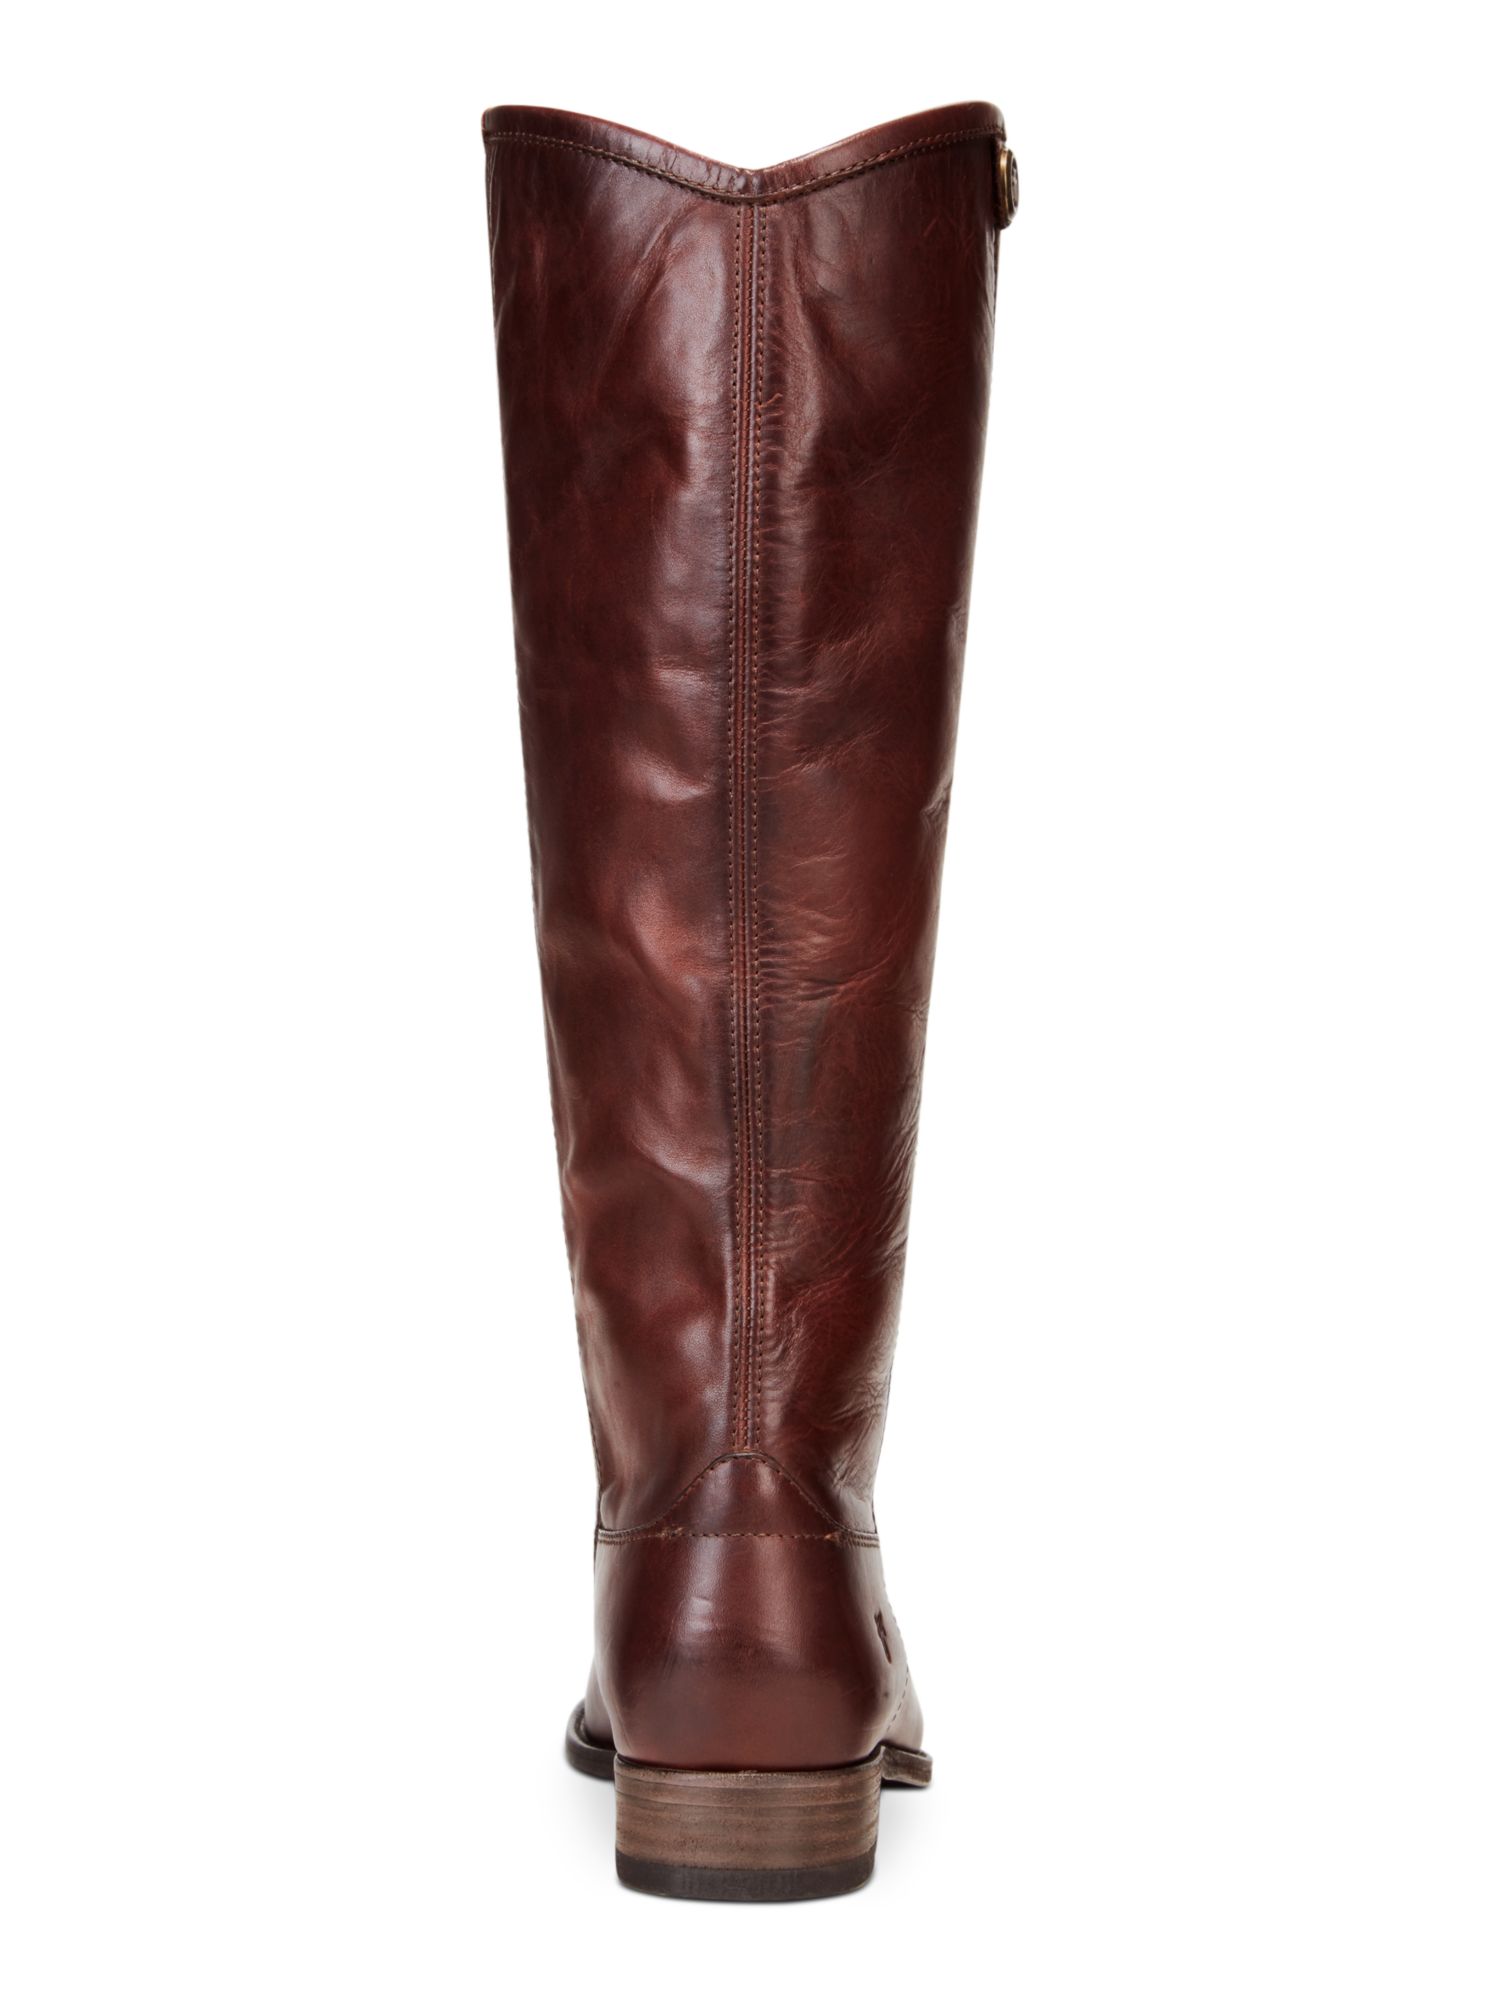 FRYE Womens Cognac Brown Button At Sides Tabs Button 2 Leather Riding Boot 5.5 B